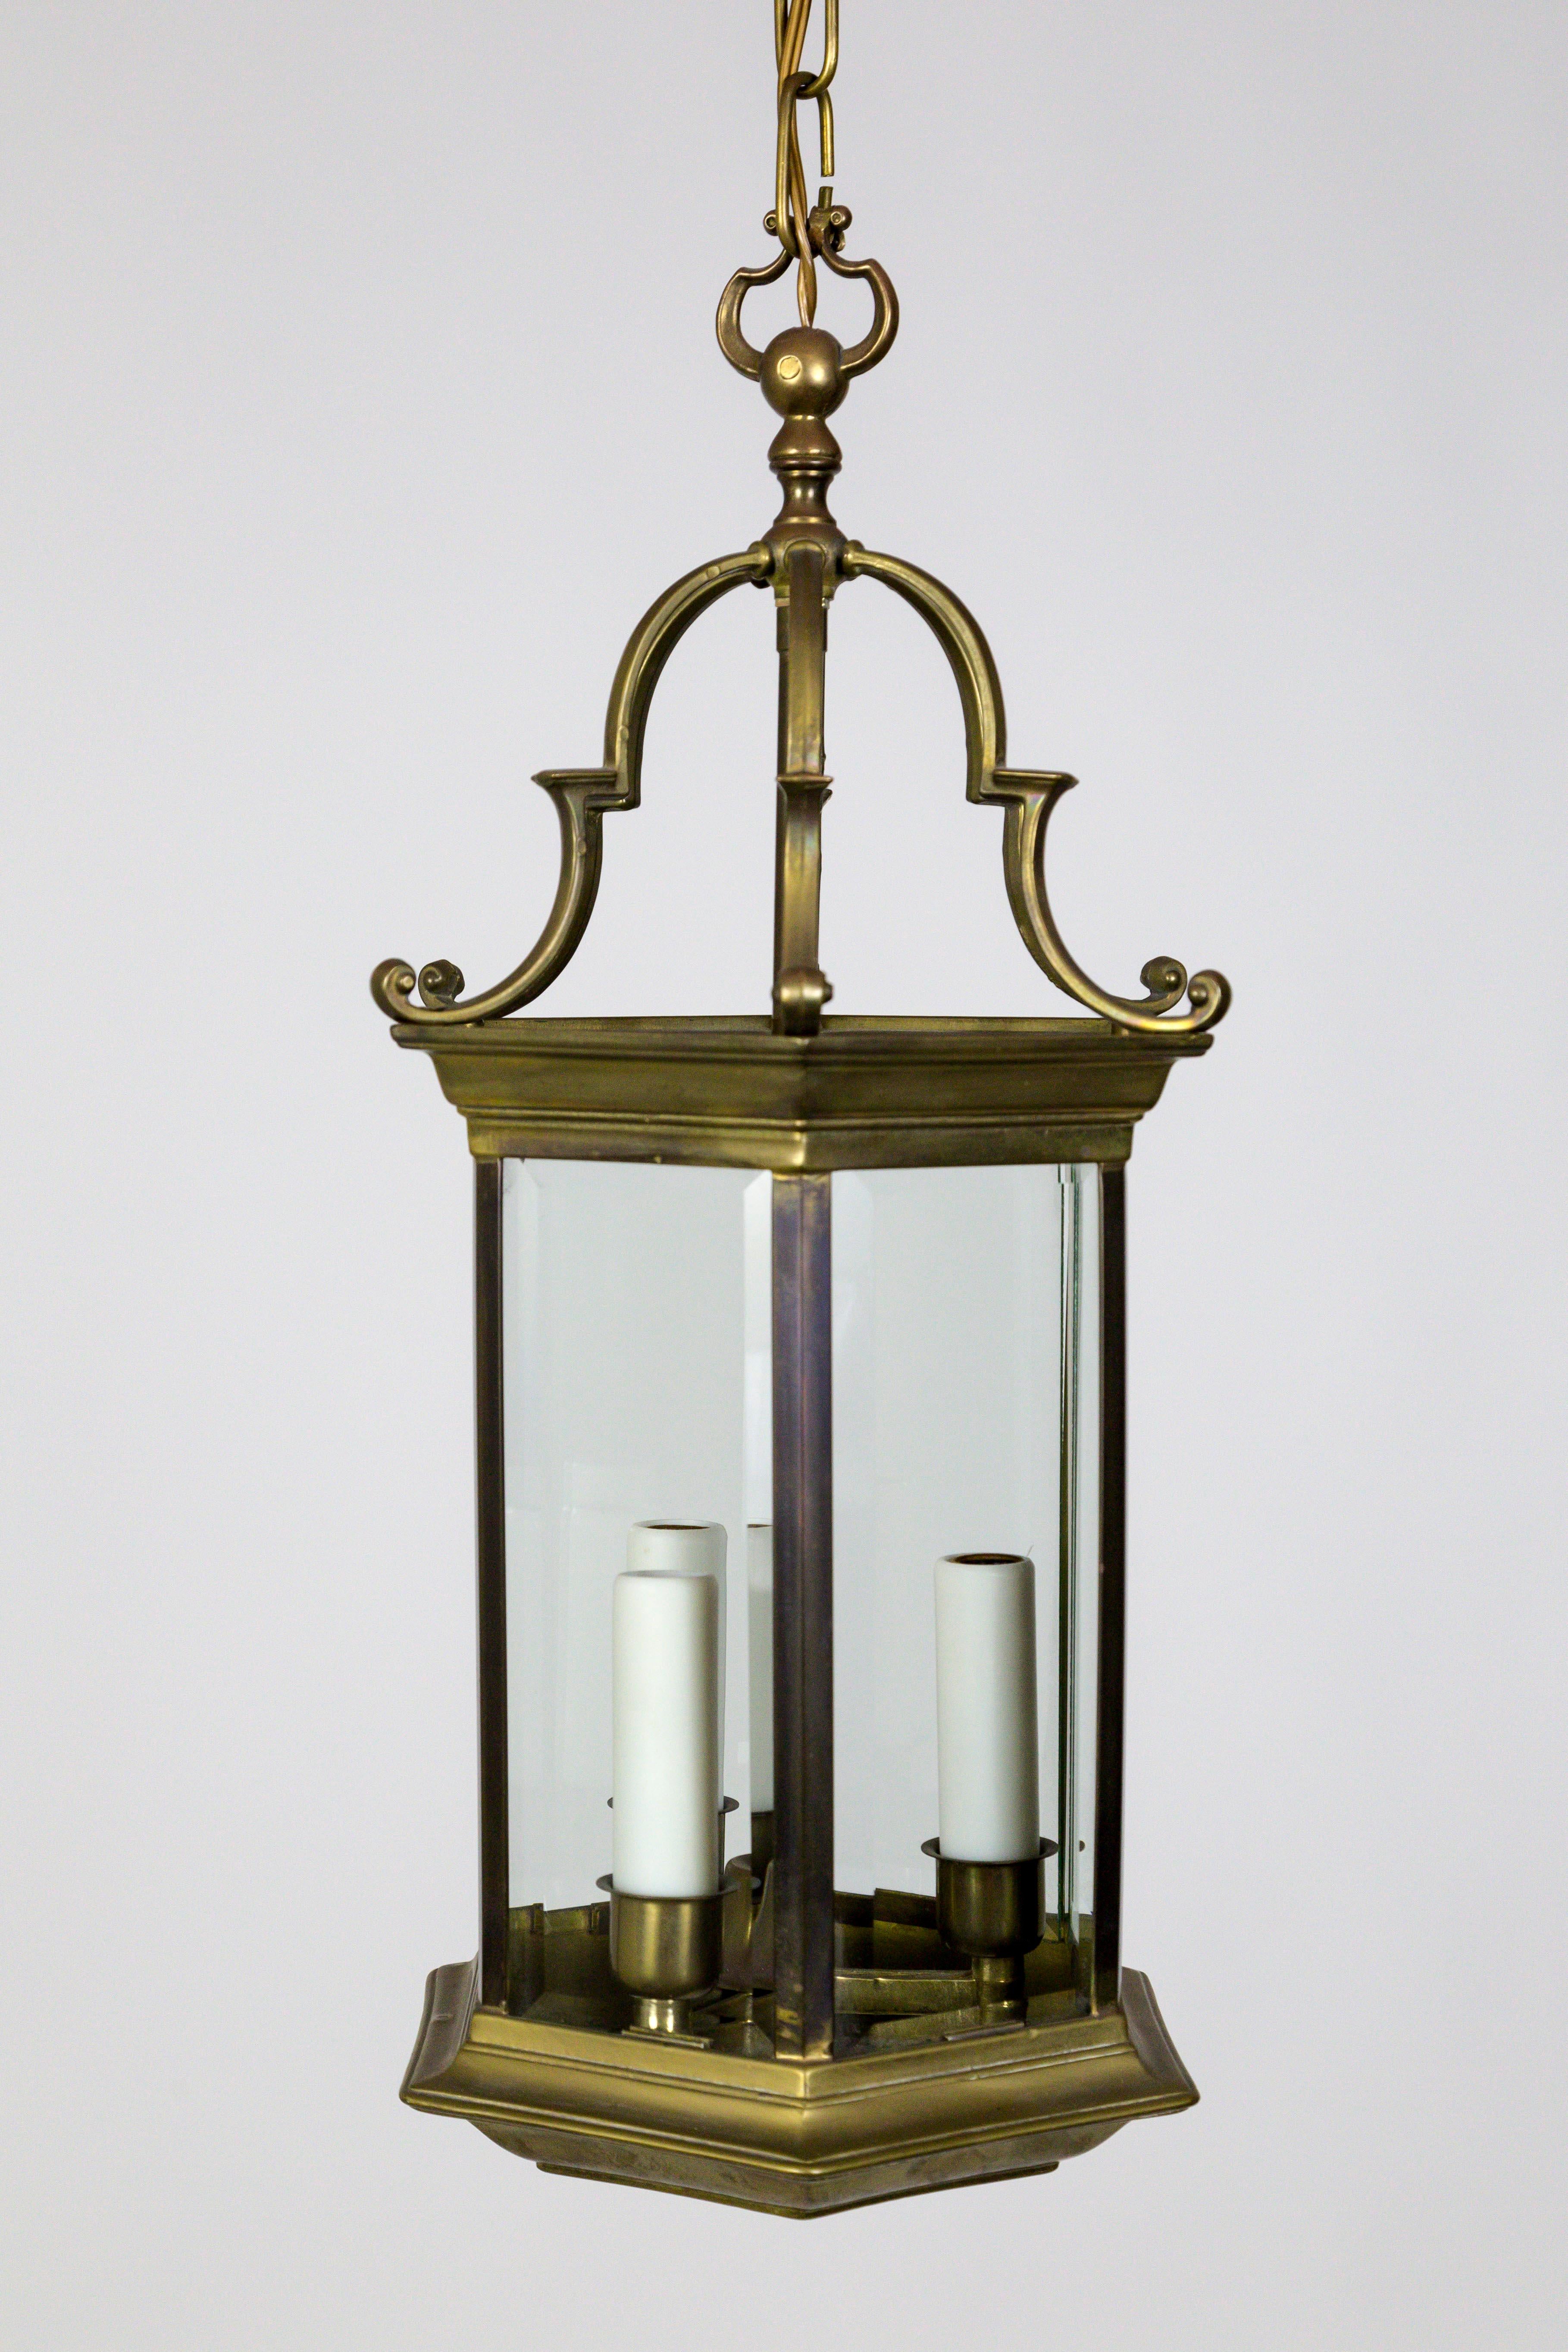 An Italian, neoclassical, 6-sided lantern with thick, beveled glass. Composed of heavy bronze and brass, with pagoda-esque details, and three candlesticks with poly-beeswax candle covers, circa 1950s. Measures: 9